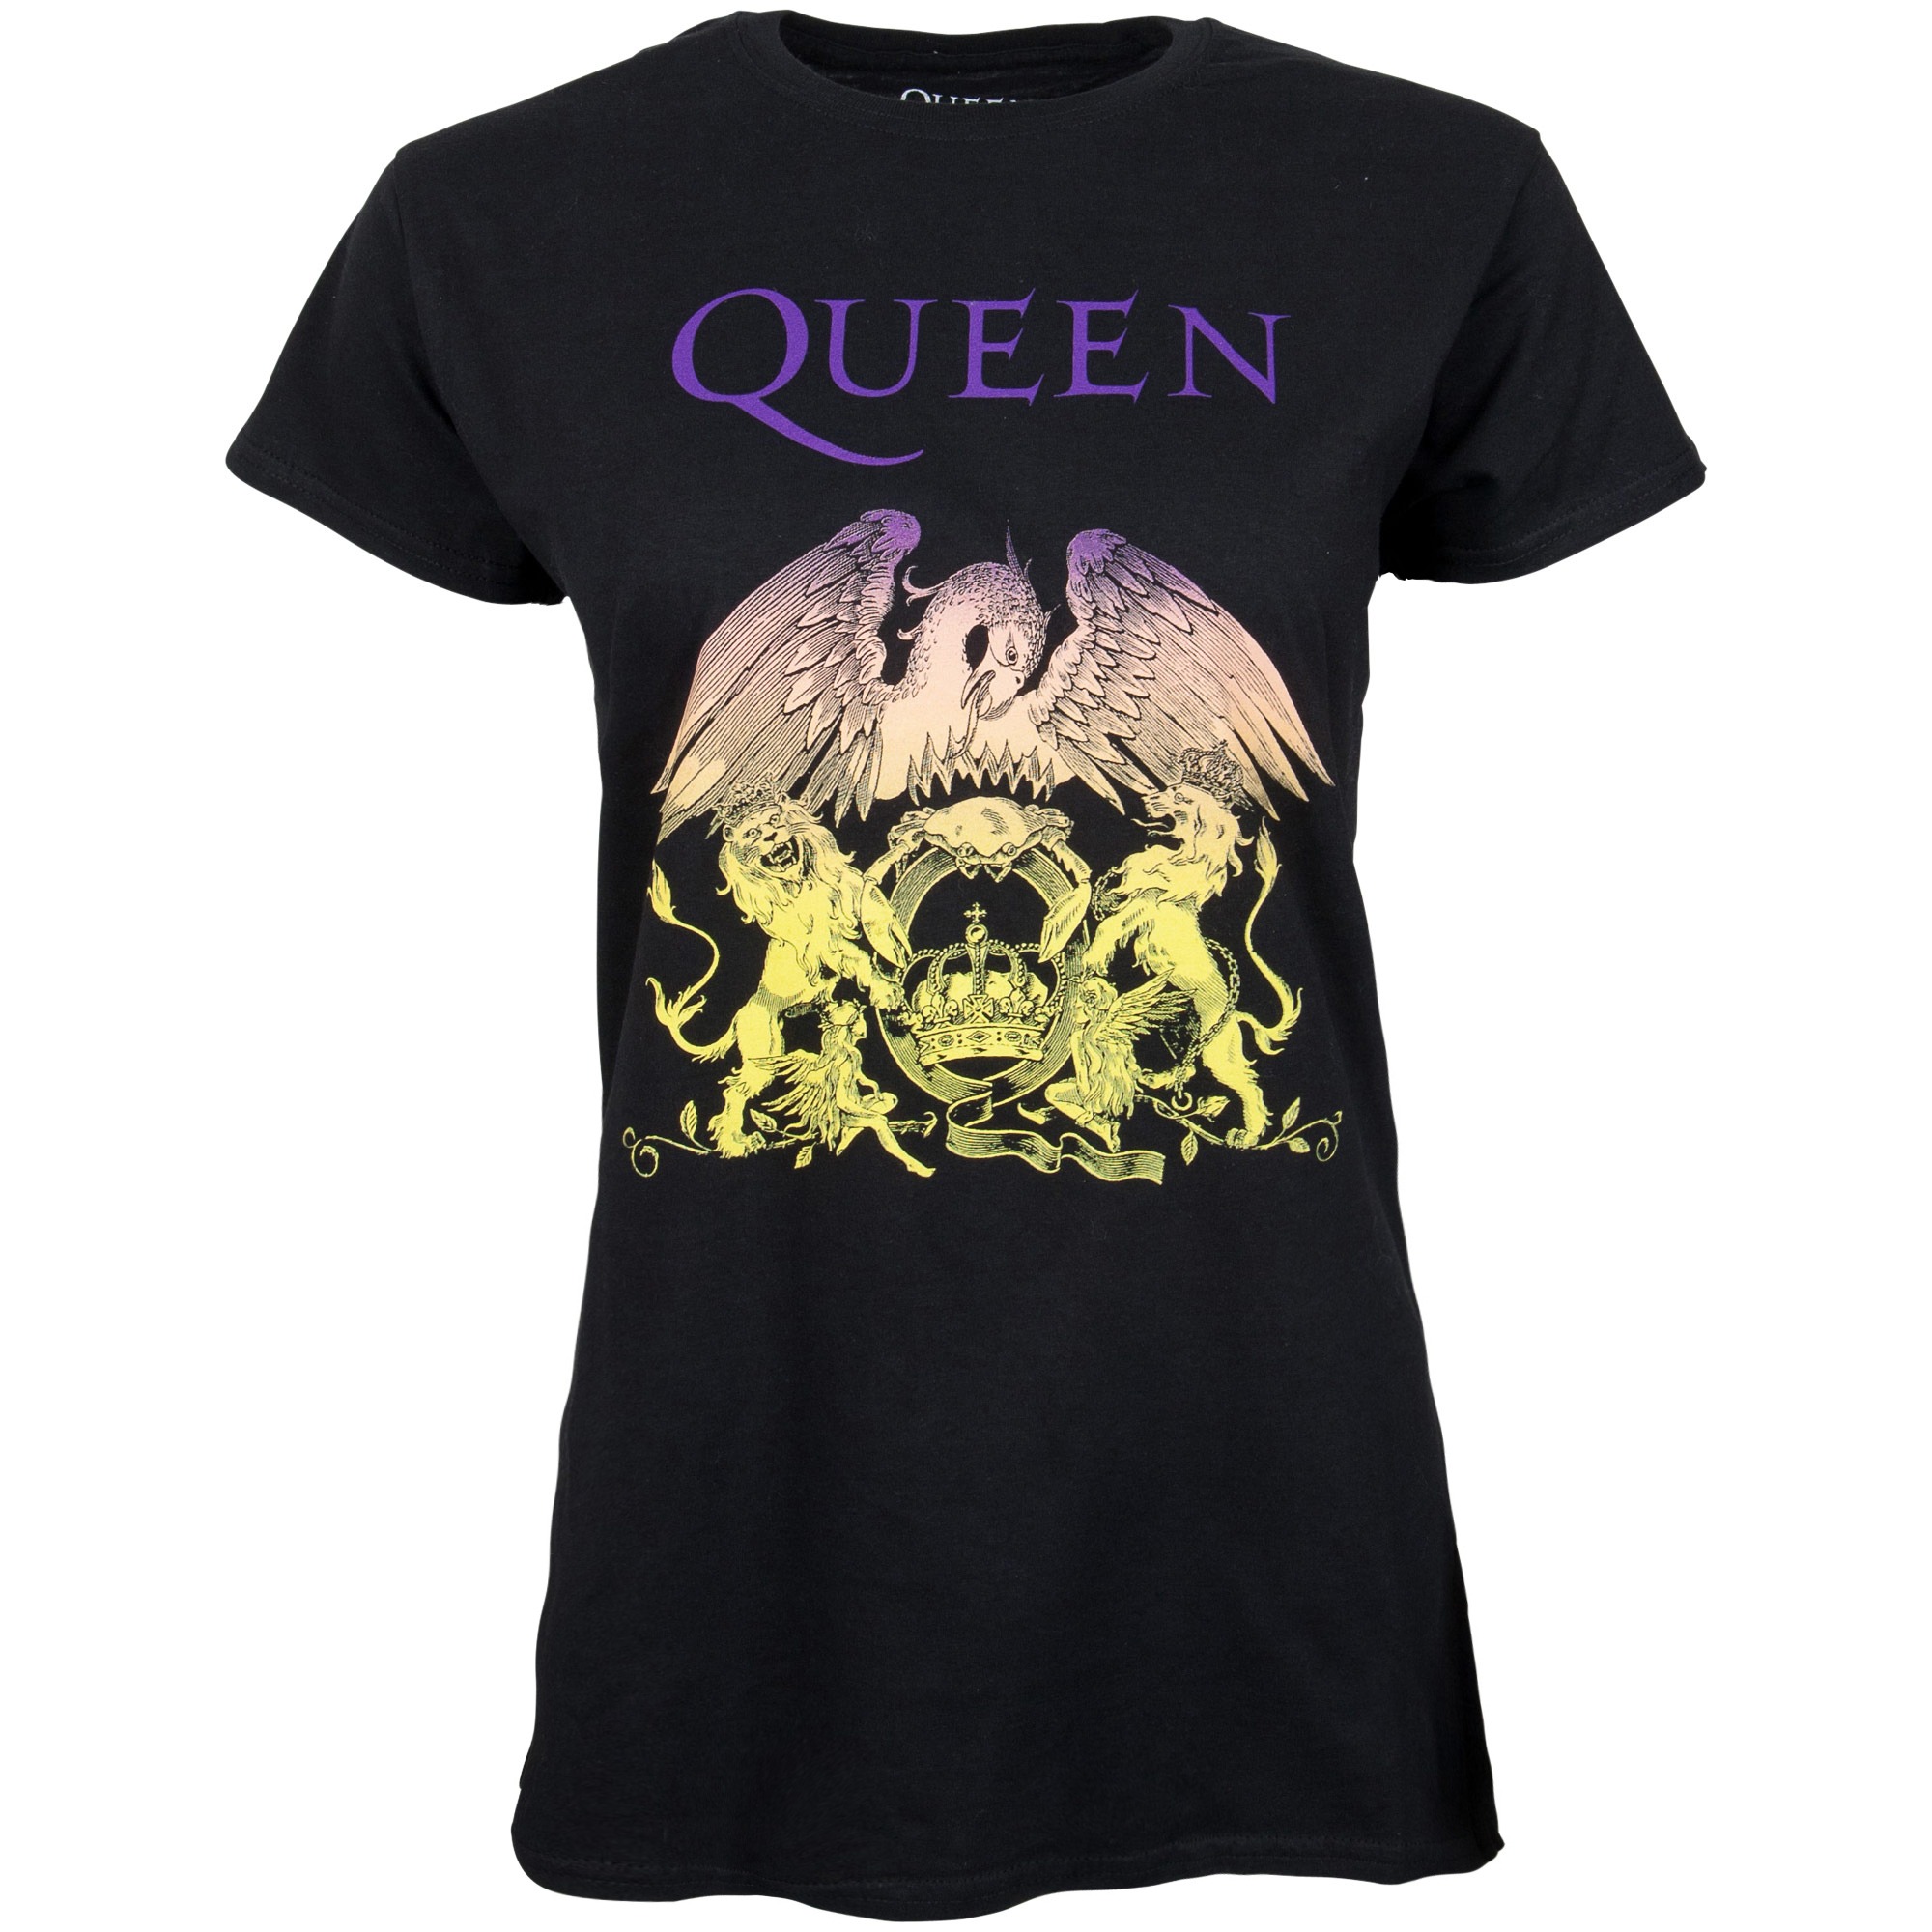 Queen Crest Womens Fitted T-Shirt Black